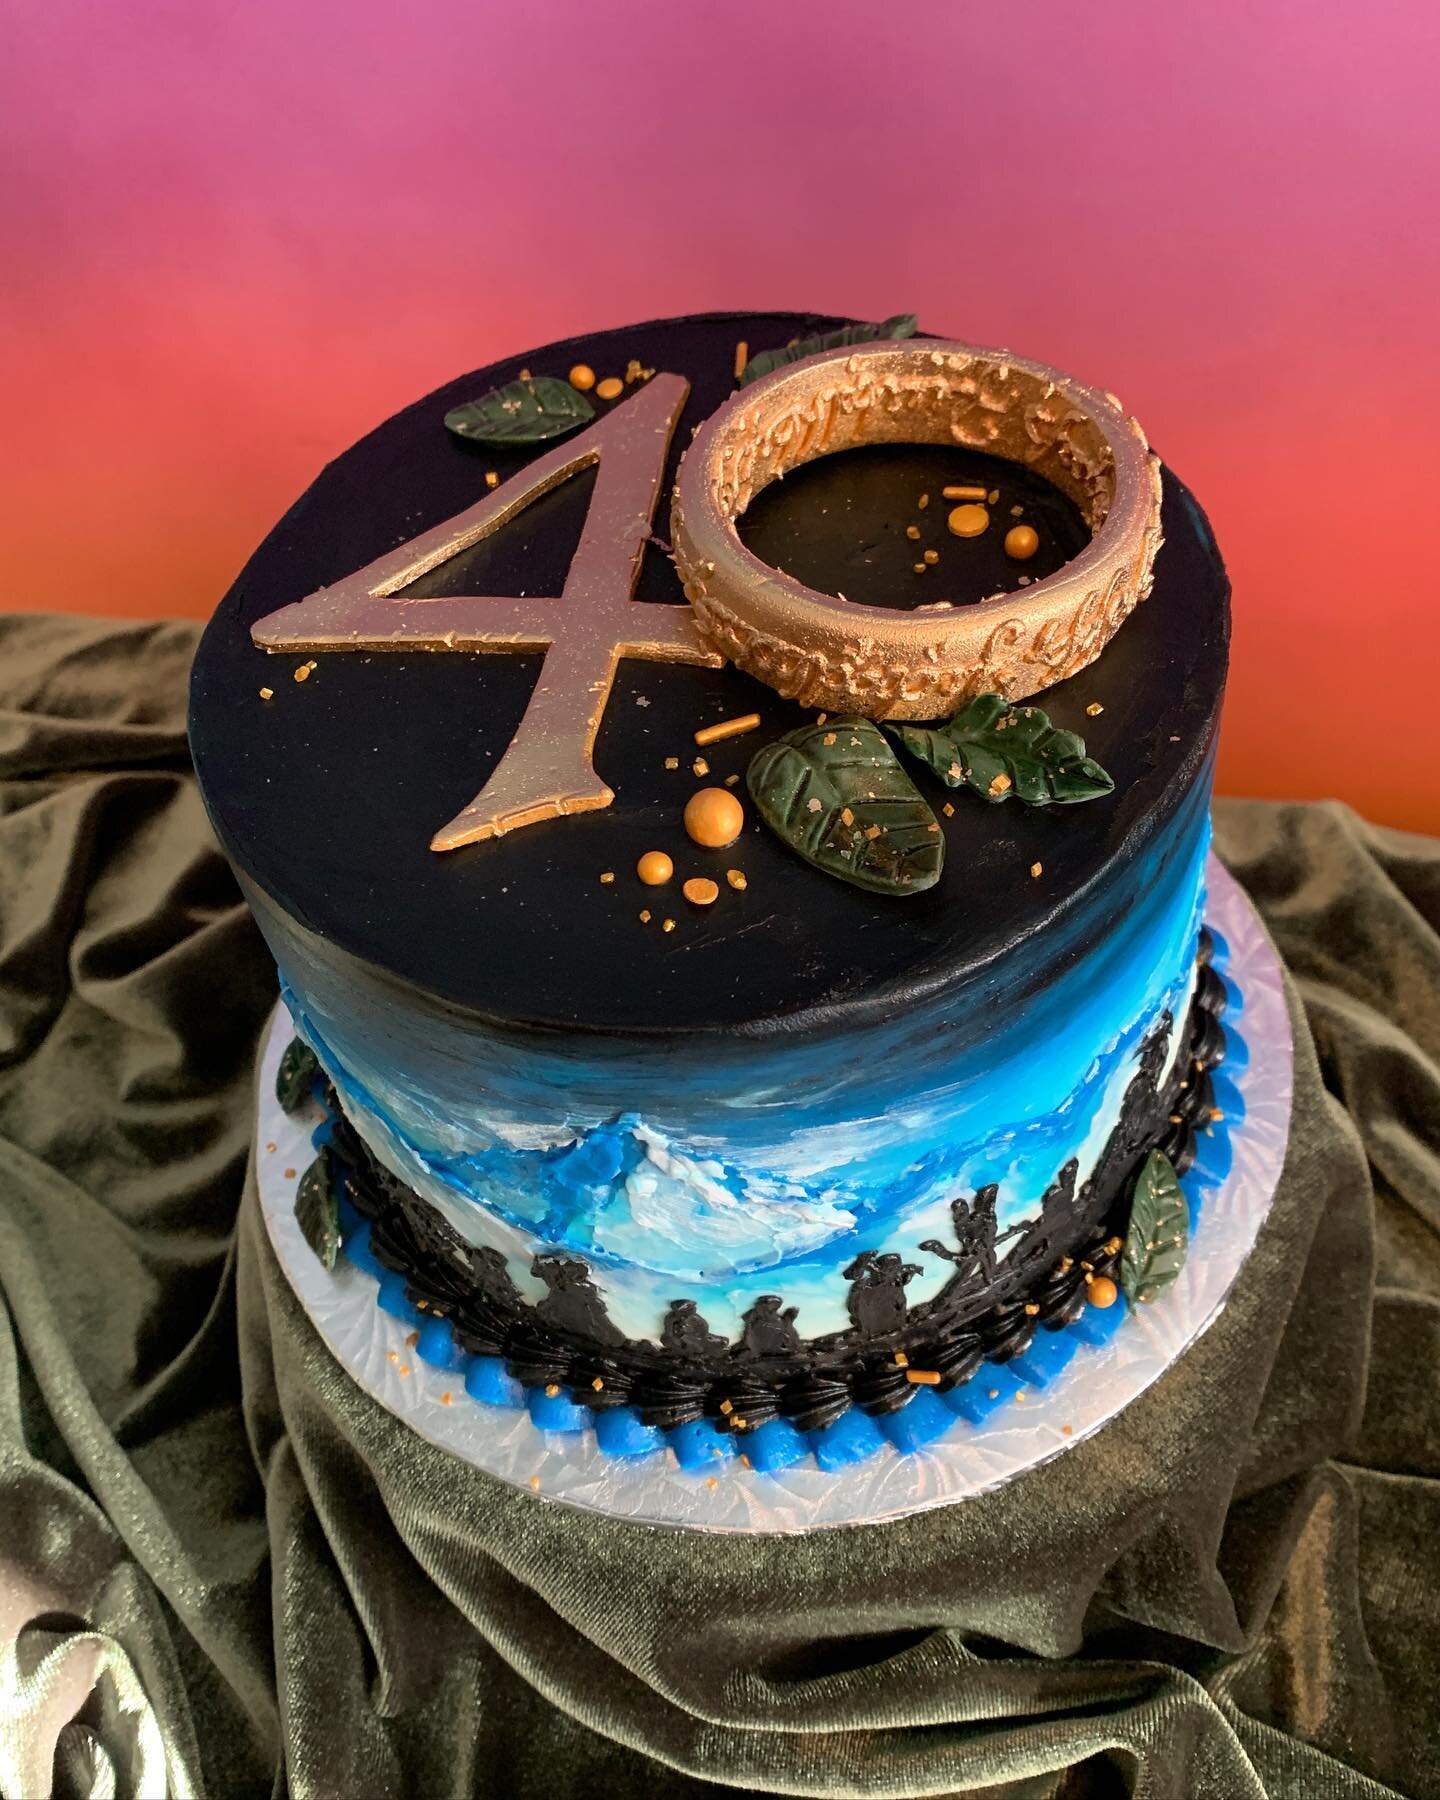 A LOTR 40th birthday cake
Commissioned by my Angel-wizard hairdresser @kristina.commune for her amazing husband. Apparently Justin had been hinting that he wanted a Lord of the Rings cake for a long time, so I&rsquo;m happy to help realize that dream